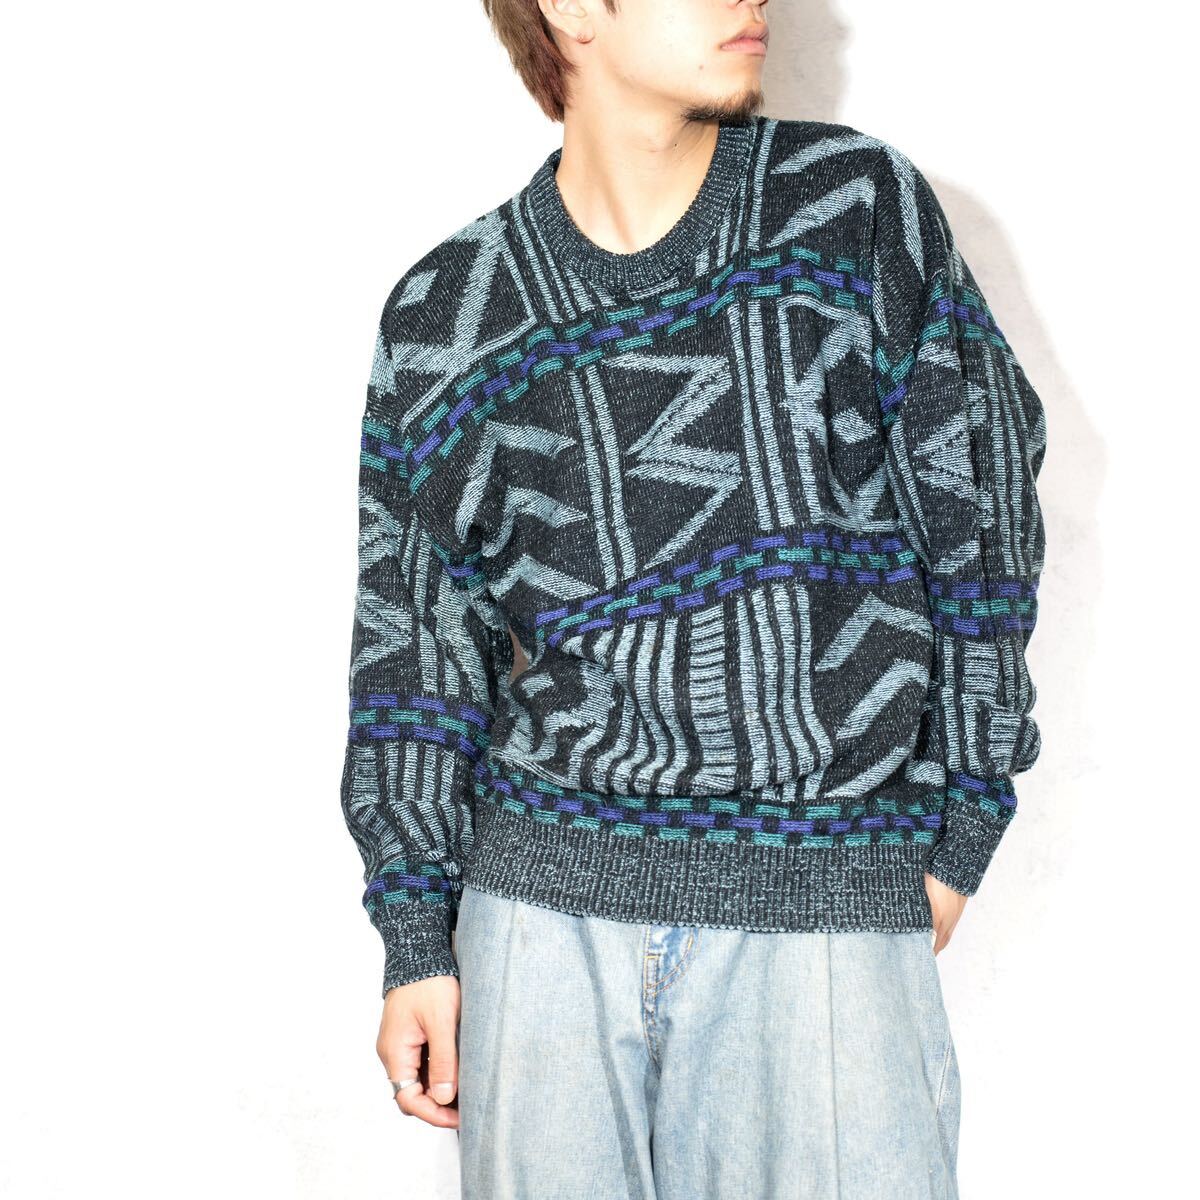 USA VINTAGE EXPRESSIONS PATTERNED DESIGN KNIT/アメリカ古着柄デザインニット